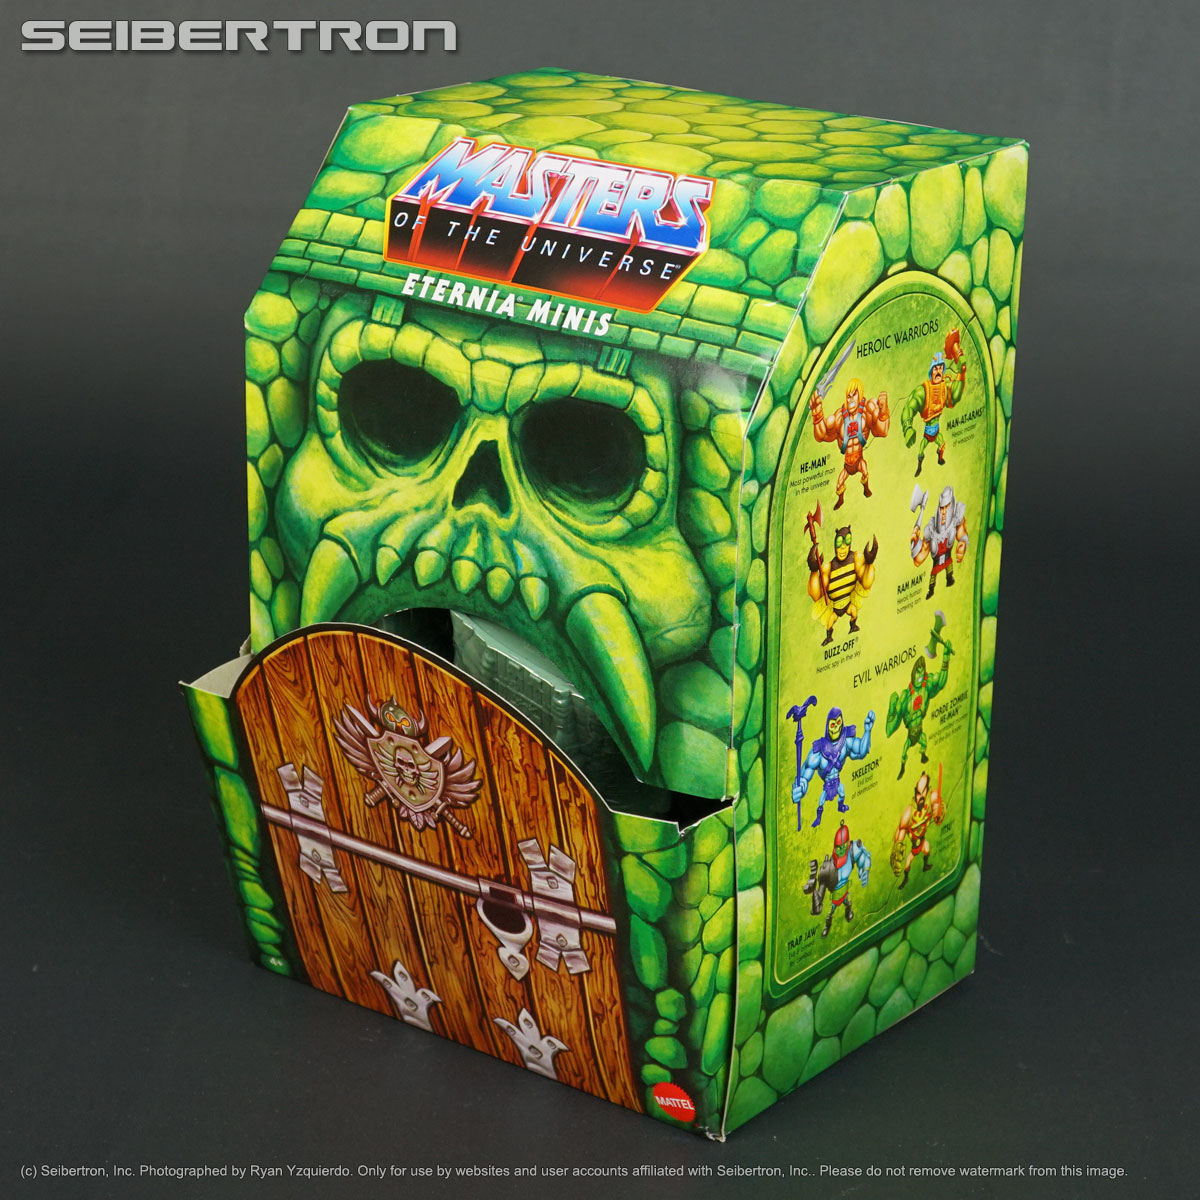 Transformers toys, Comic Books, BotBots, Masters of the Universe, Teenage Mutant Ninja Turtles, Gobots, and other listings from Seibertron.com: Eternia Minis SKELETOR Masters of the Universe Origins MOTU Mattel 2020 New